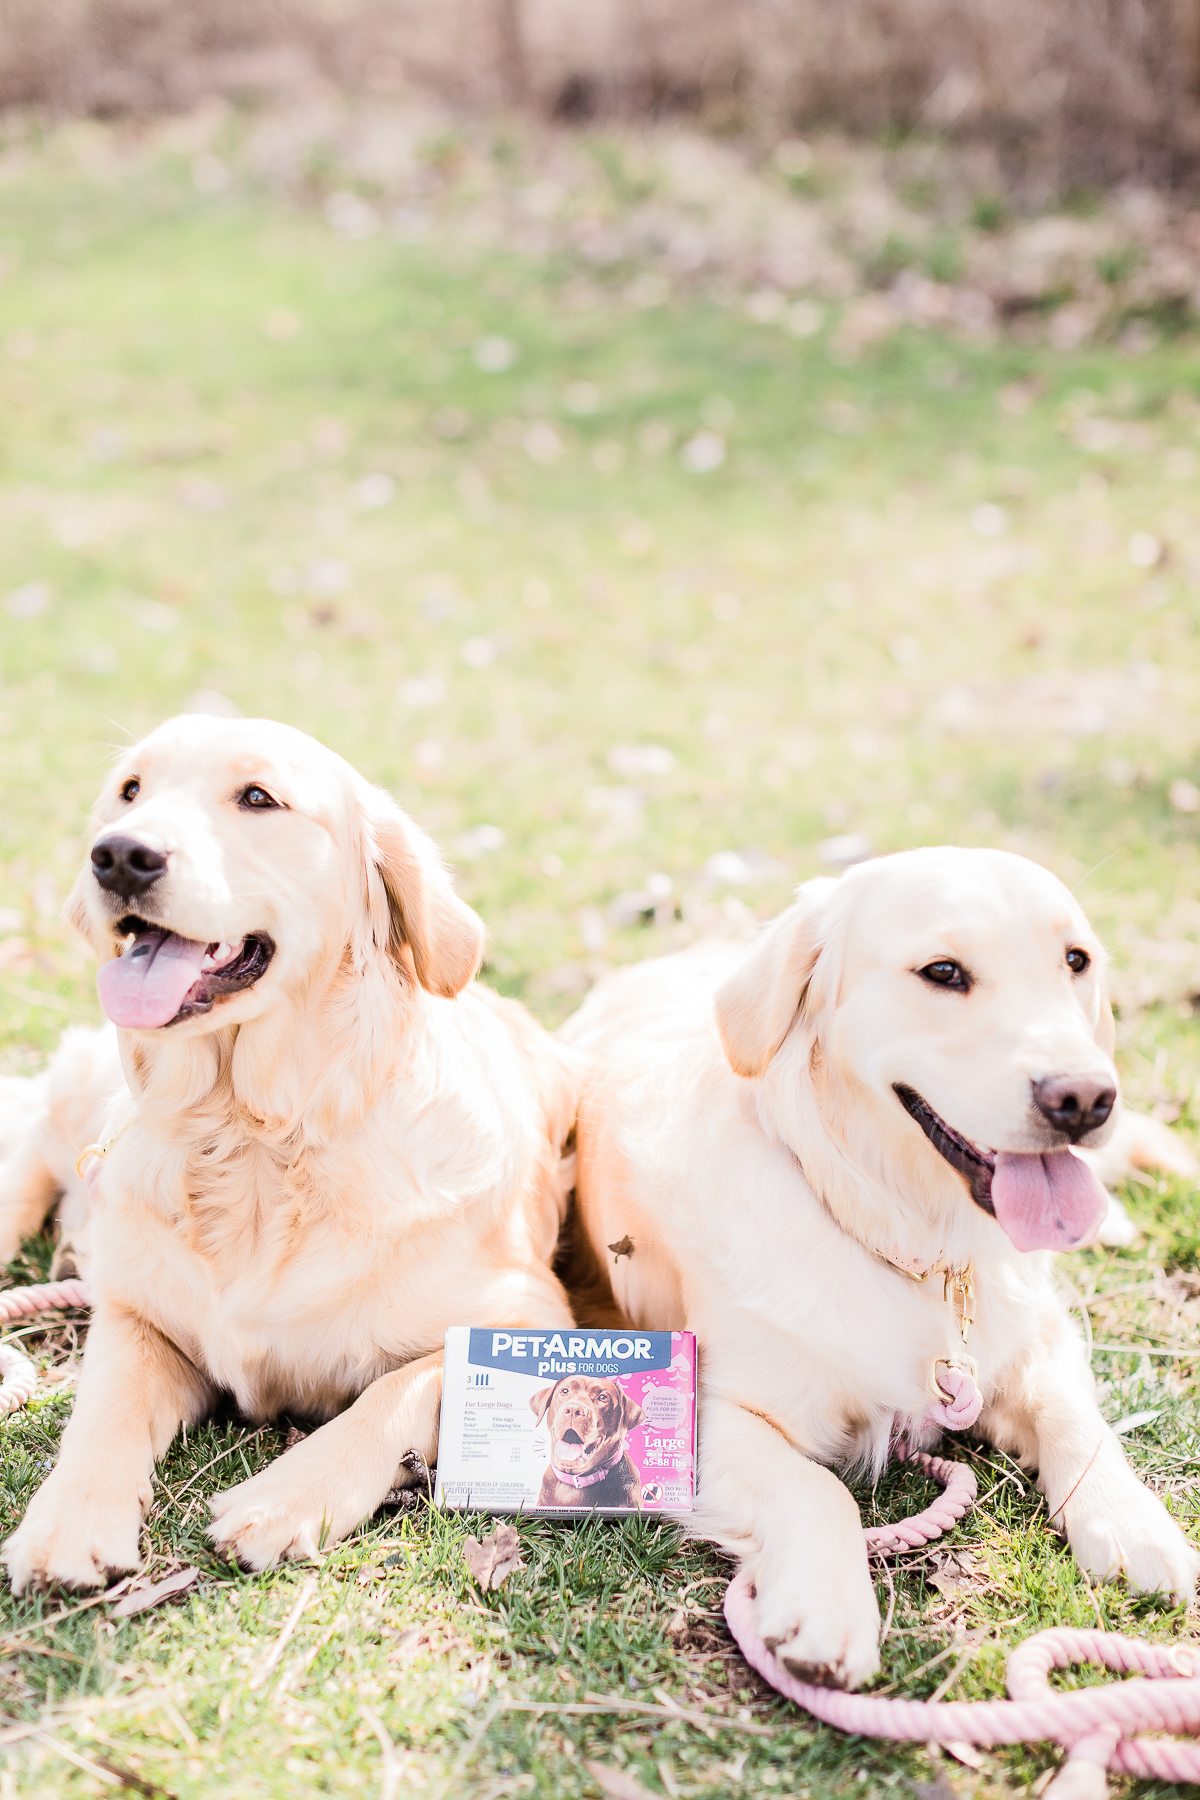 How to Keep Your Dogs Flea and Tick Free: A PetArmor Plus Review by popular southern lifestyle blogger Stephanie Ziajka from Diary of a Debutante, PetArmor Plus for Dogs review, PetArmor Plus reviews, PetArmor Plus for Dogs at PetSmart, cute golden retriever puppies